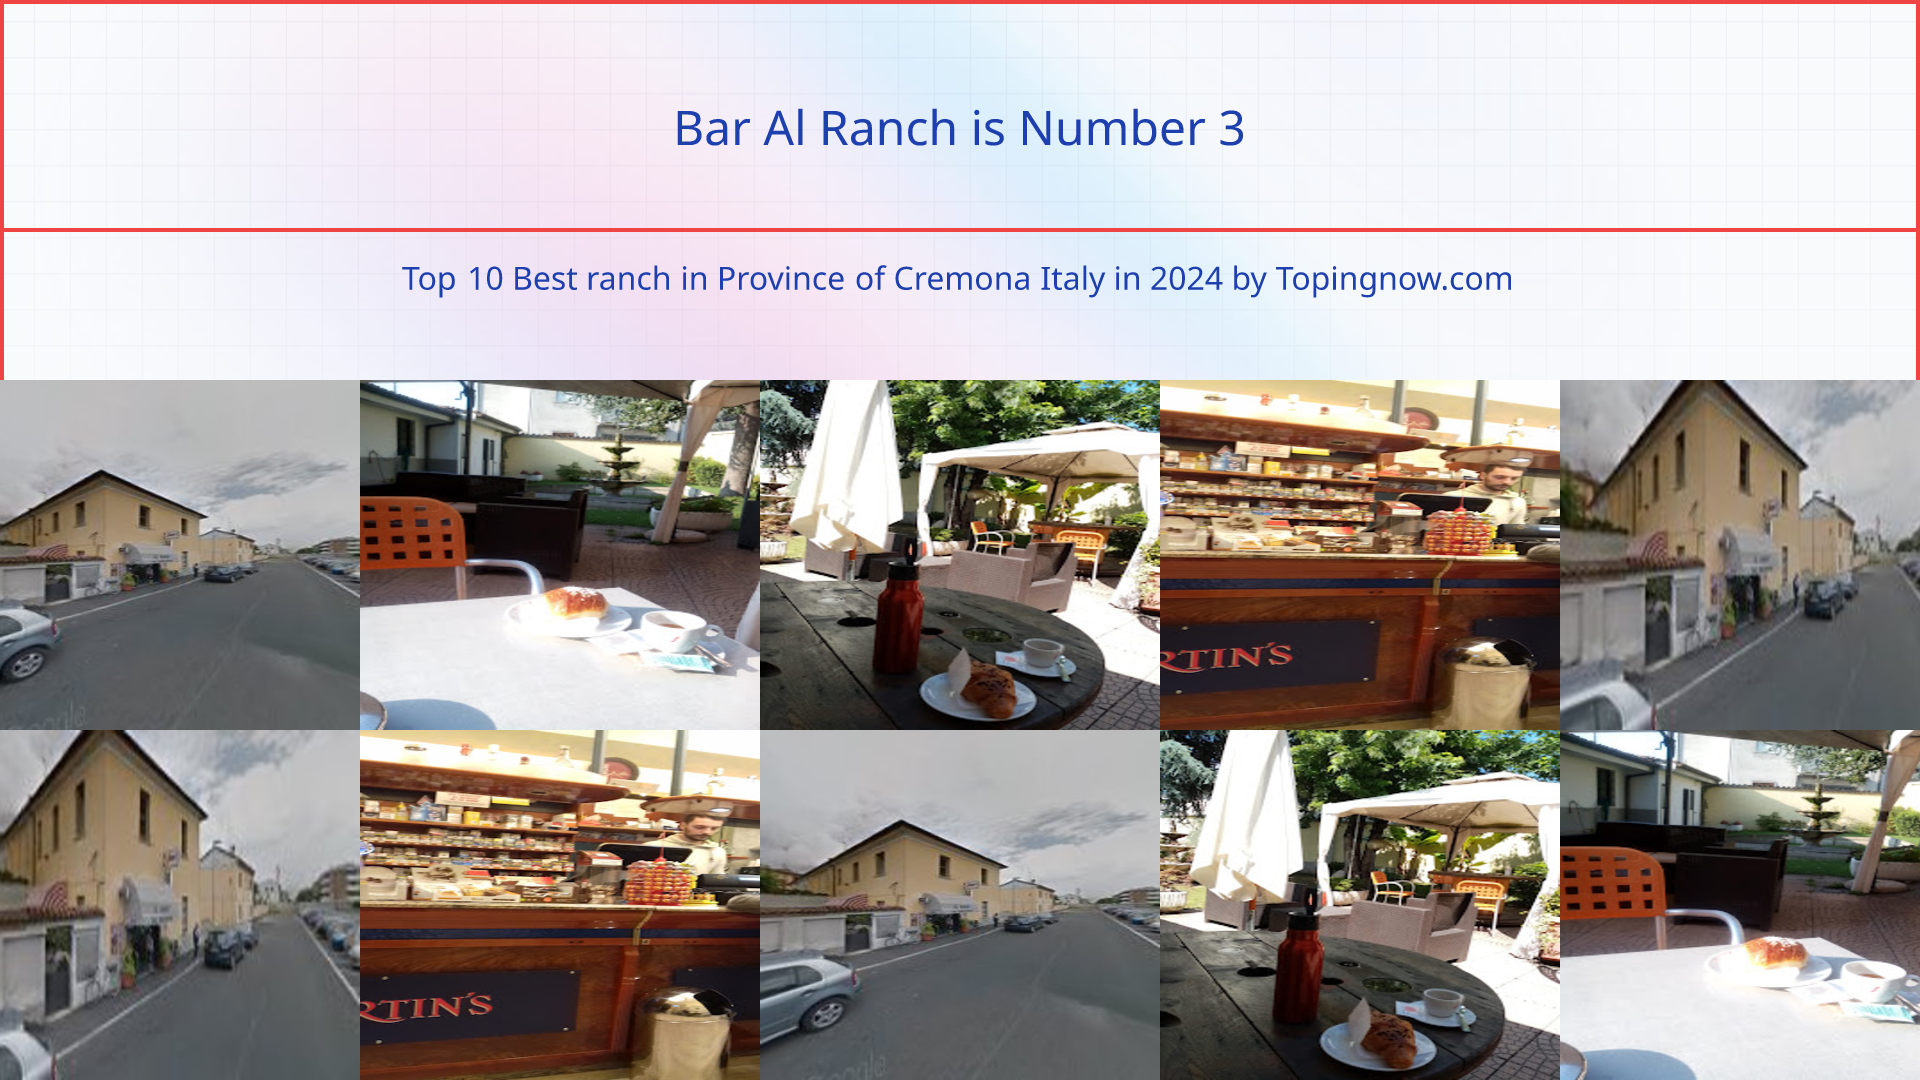 Bar Al Ranch: Top 10 Best ranch in Province of Cremona Italy in 2024